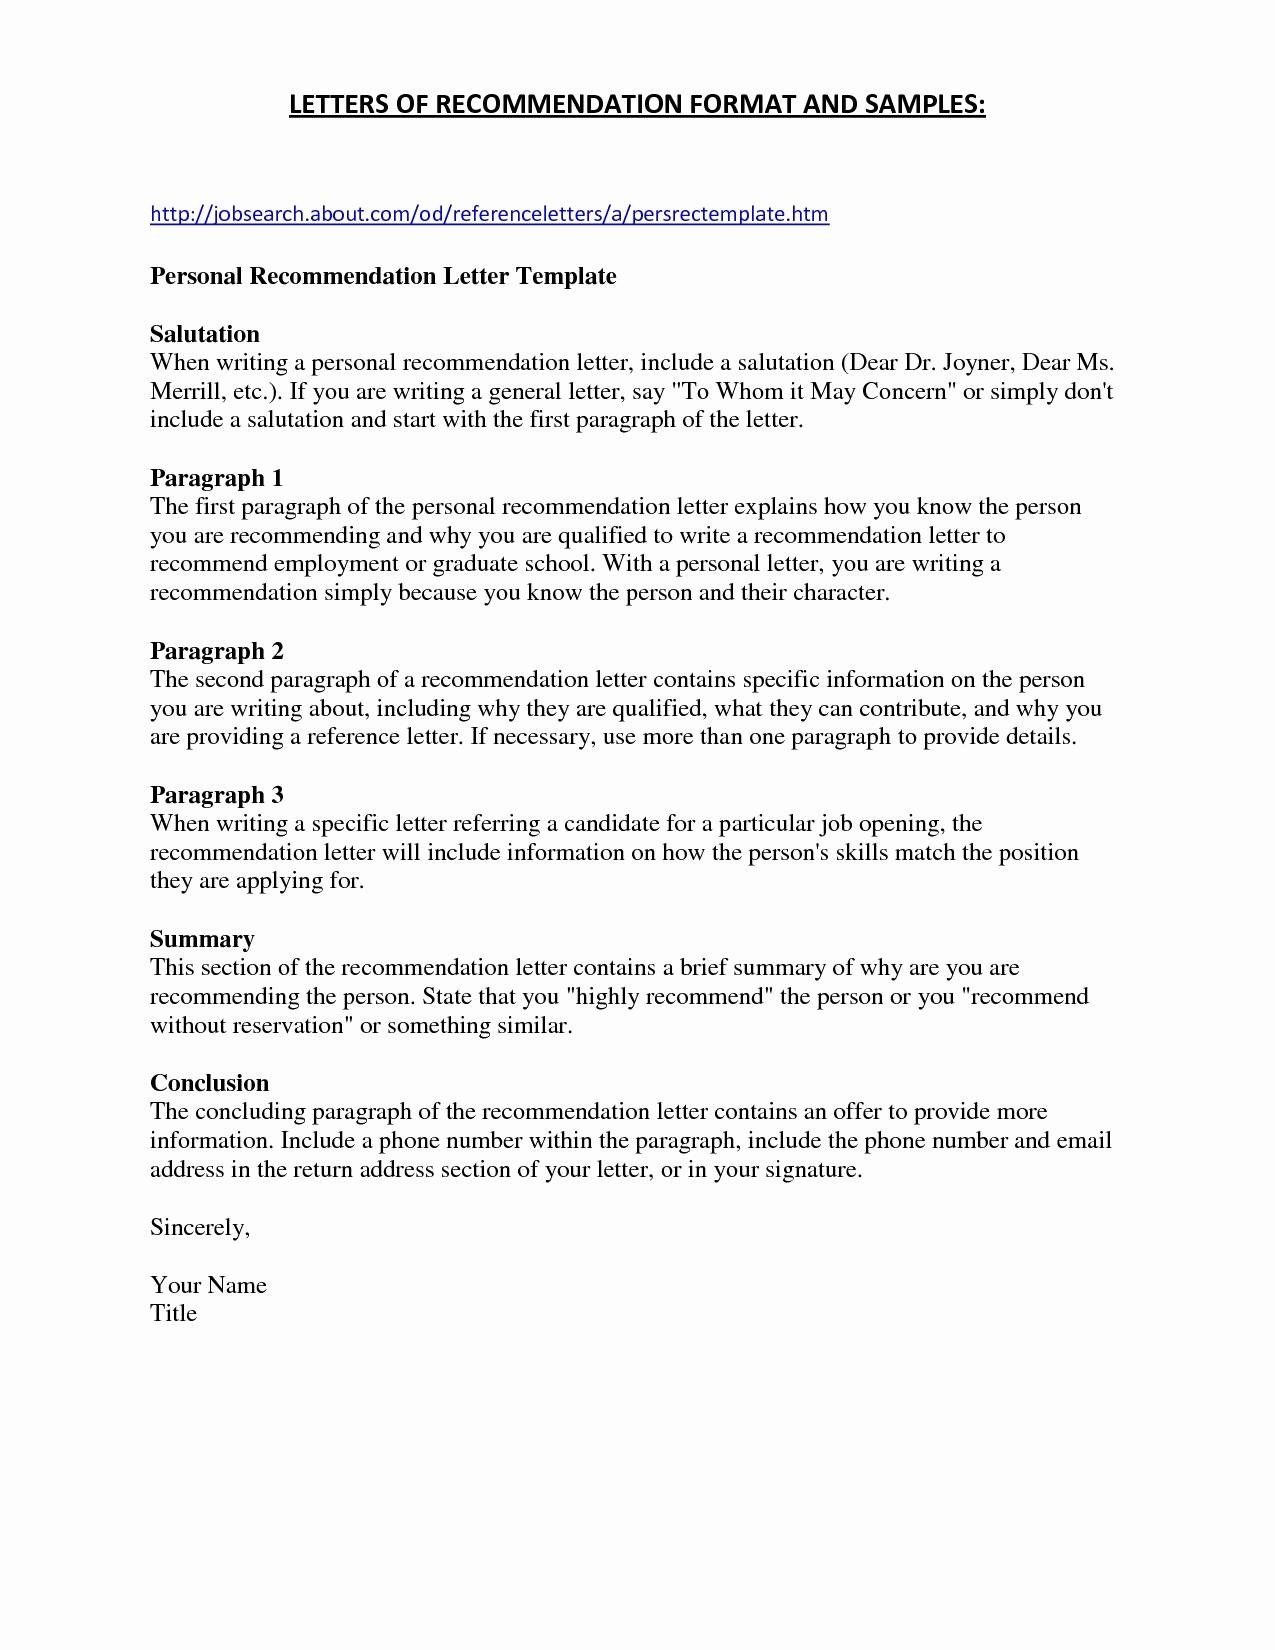 Lease Default Letter Template - How to Write A Cover Letter for A Rental Application